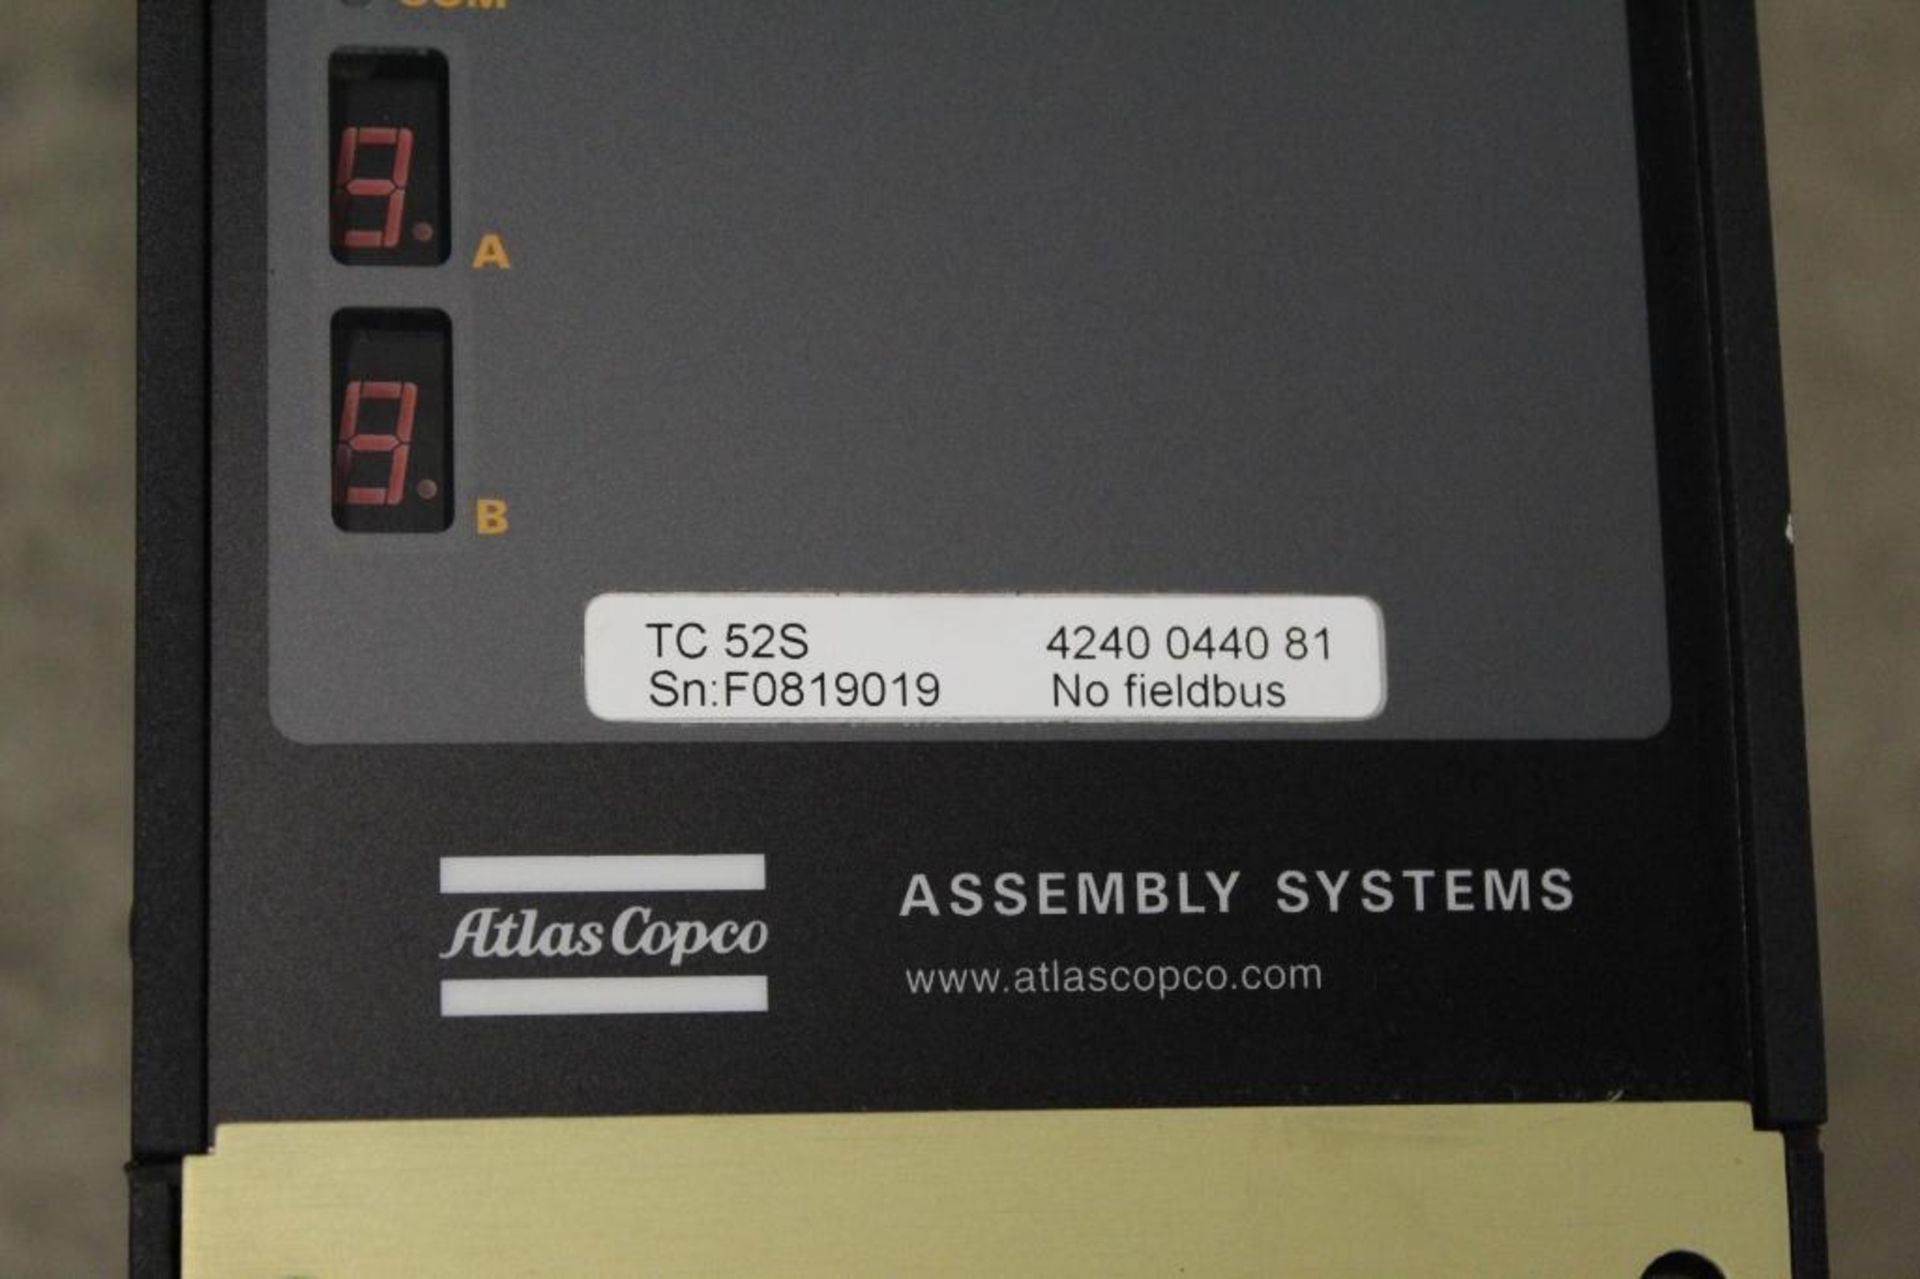 Atlas Copco 4240 0440 81 Power MACS Assembly Systems Controller - Image 2 of 2